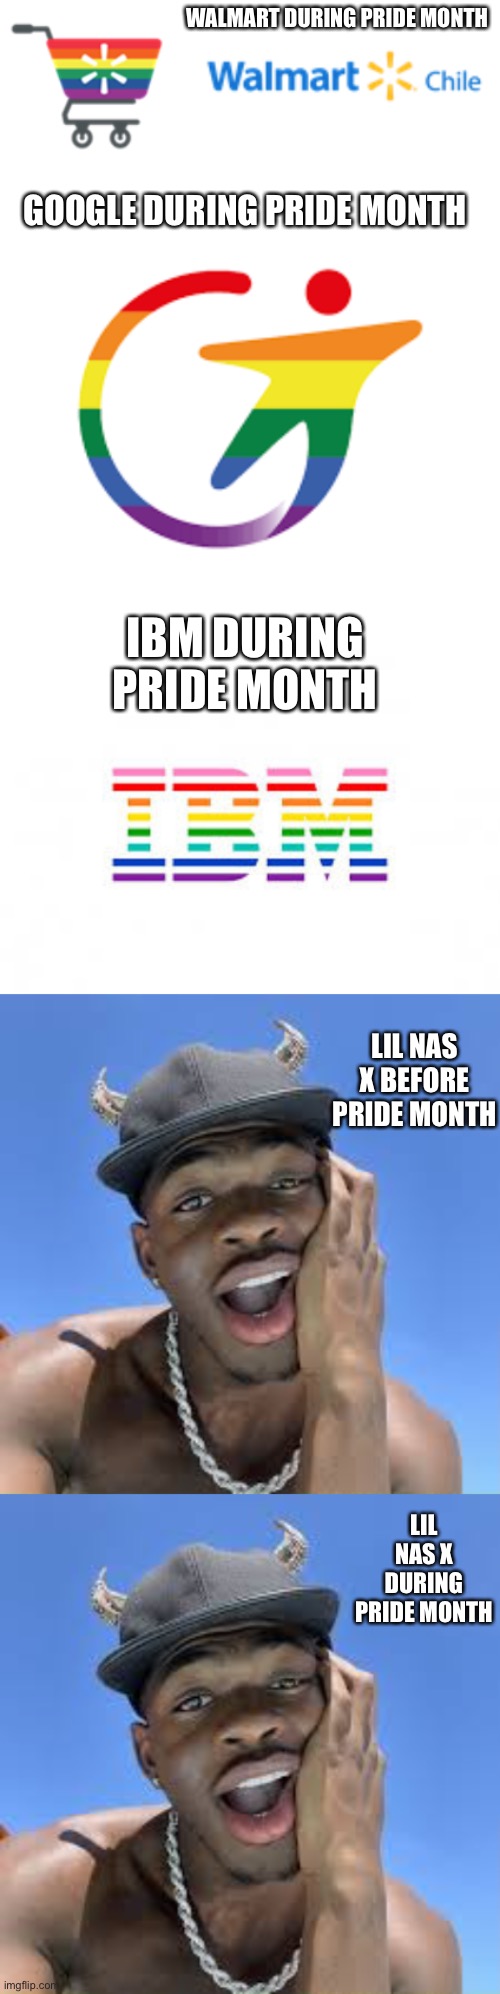 During pride month | WALMART DURING PRIDE MONTH; GOOGLE DURING PRIDE MONTH; IBM DURING PRIDE MONTH; LIL NAS X BEFORE PRIDE MONTH; LIL NAS X DURING PRIDE MONTH | image tagged in memes,funny,lil nas x,gay,gay pride,walmart | made w/ Imgflip meme maker